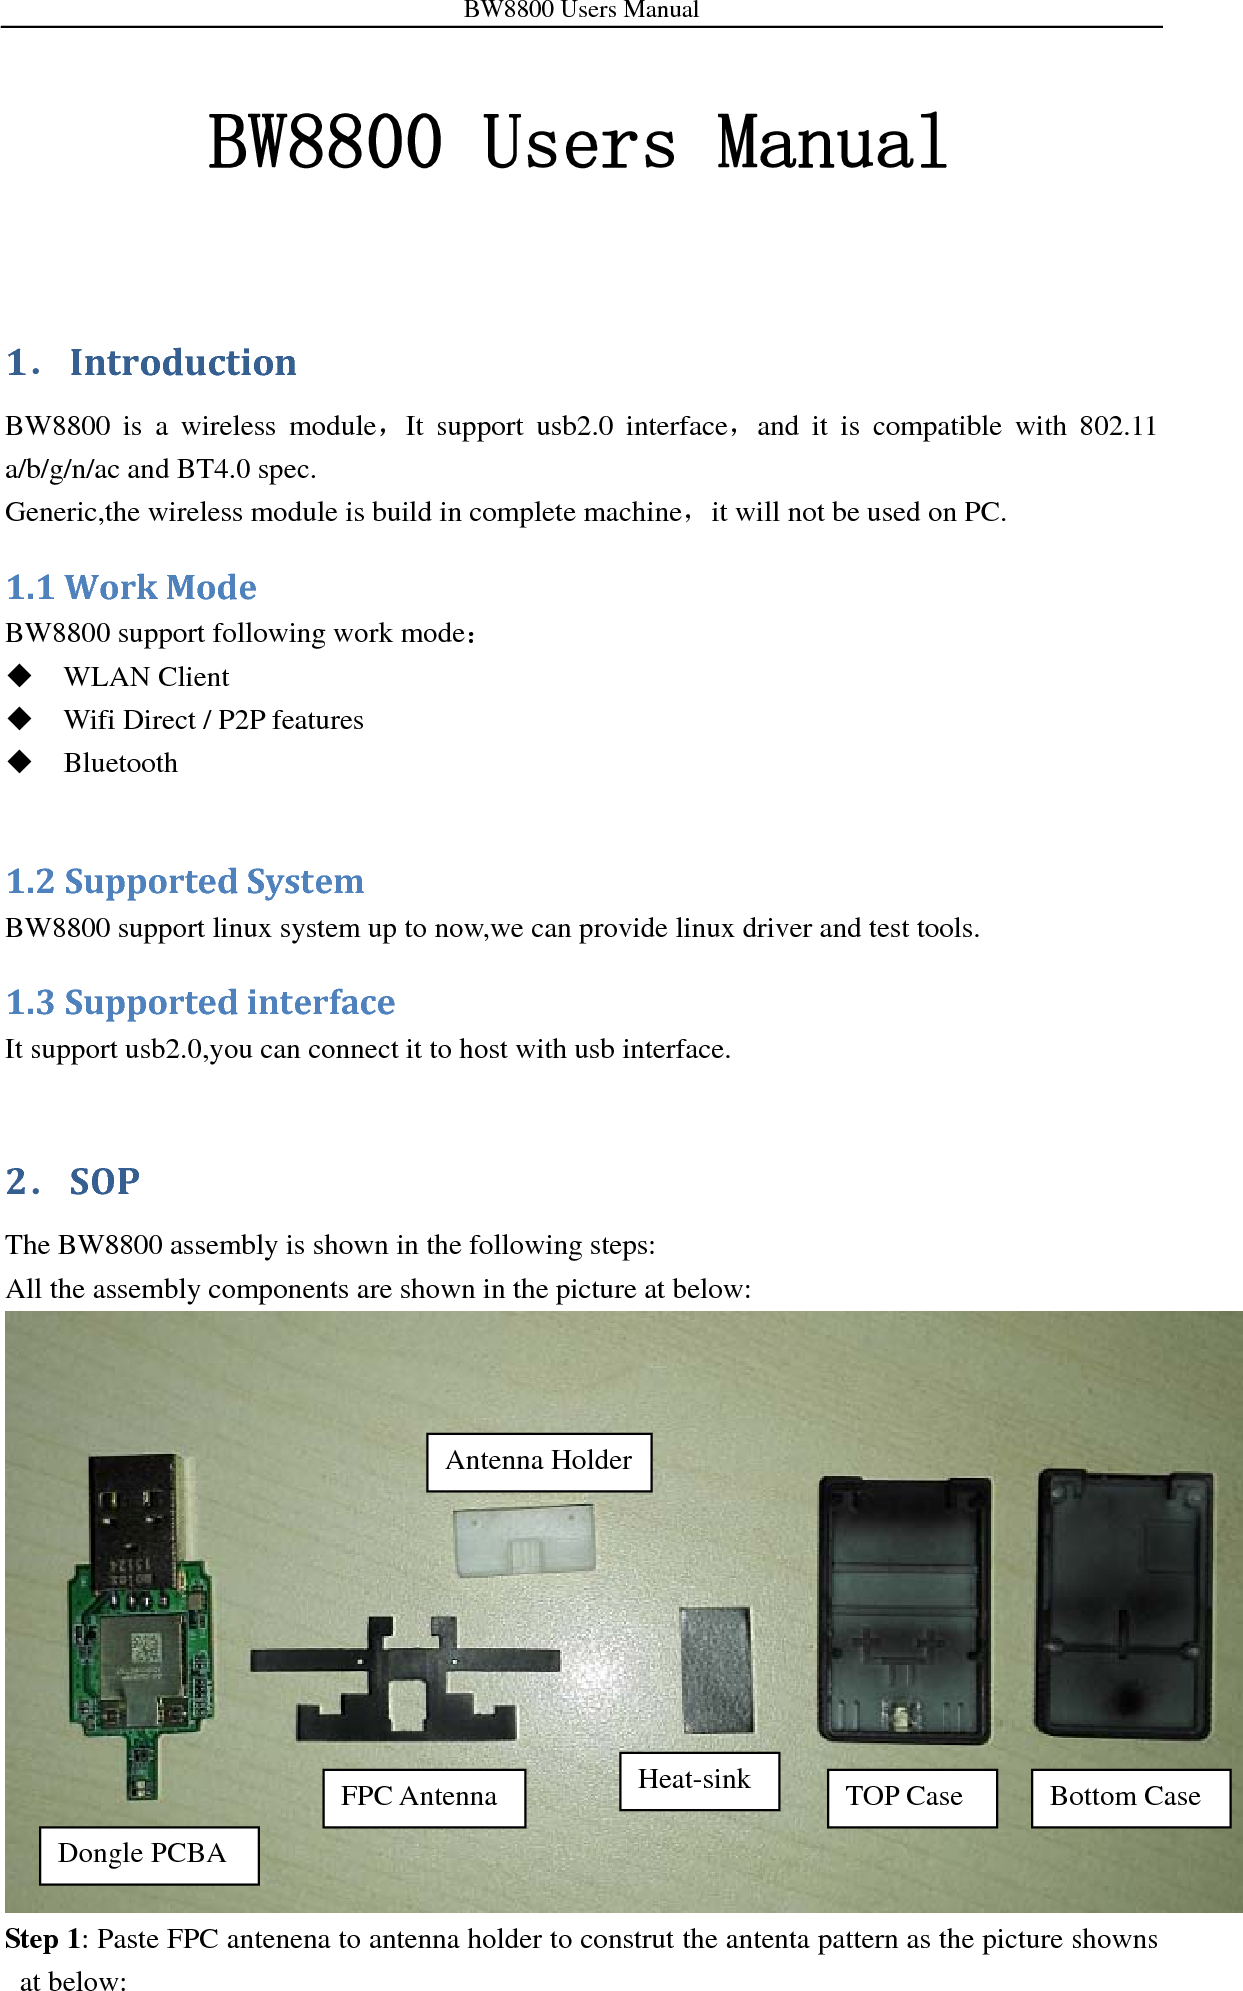 BW8800 Users Manual   BW8800 Users Manual  1． IntroductionBW8800 is a wireless module，It support usb2.0 interface，and it is compatible with 802.11 a/b/g/n/ac and BT4.0 spec. Generic,the wireless module is build in complete machine，it will not be used on PC. 1.1WorkModeBW8800 support following work mode：  WLAN Client  Wifi Direct / P2P features  Bluetooth  1.2SupportedSystemBW8800 support linux system up to now,we can provide linux driver and test tools. 1.3SupportedinterfaceIt support usb2.0,you can connect it to host with usb interface. 2． SOPThe BW8800 assembly is shown in the following steps: All the assembly components are shown in the picture at below:  Step 1: Paste FPC antenena to antenna holder to construt the antenta pattern as the picture showns at below: Dongle PCBA FPC Antenna  Bottom Case Heat-sink Antenna HolderTOP Case 